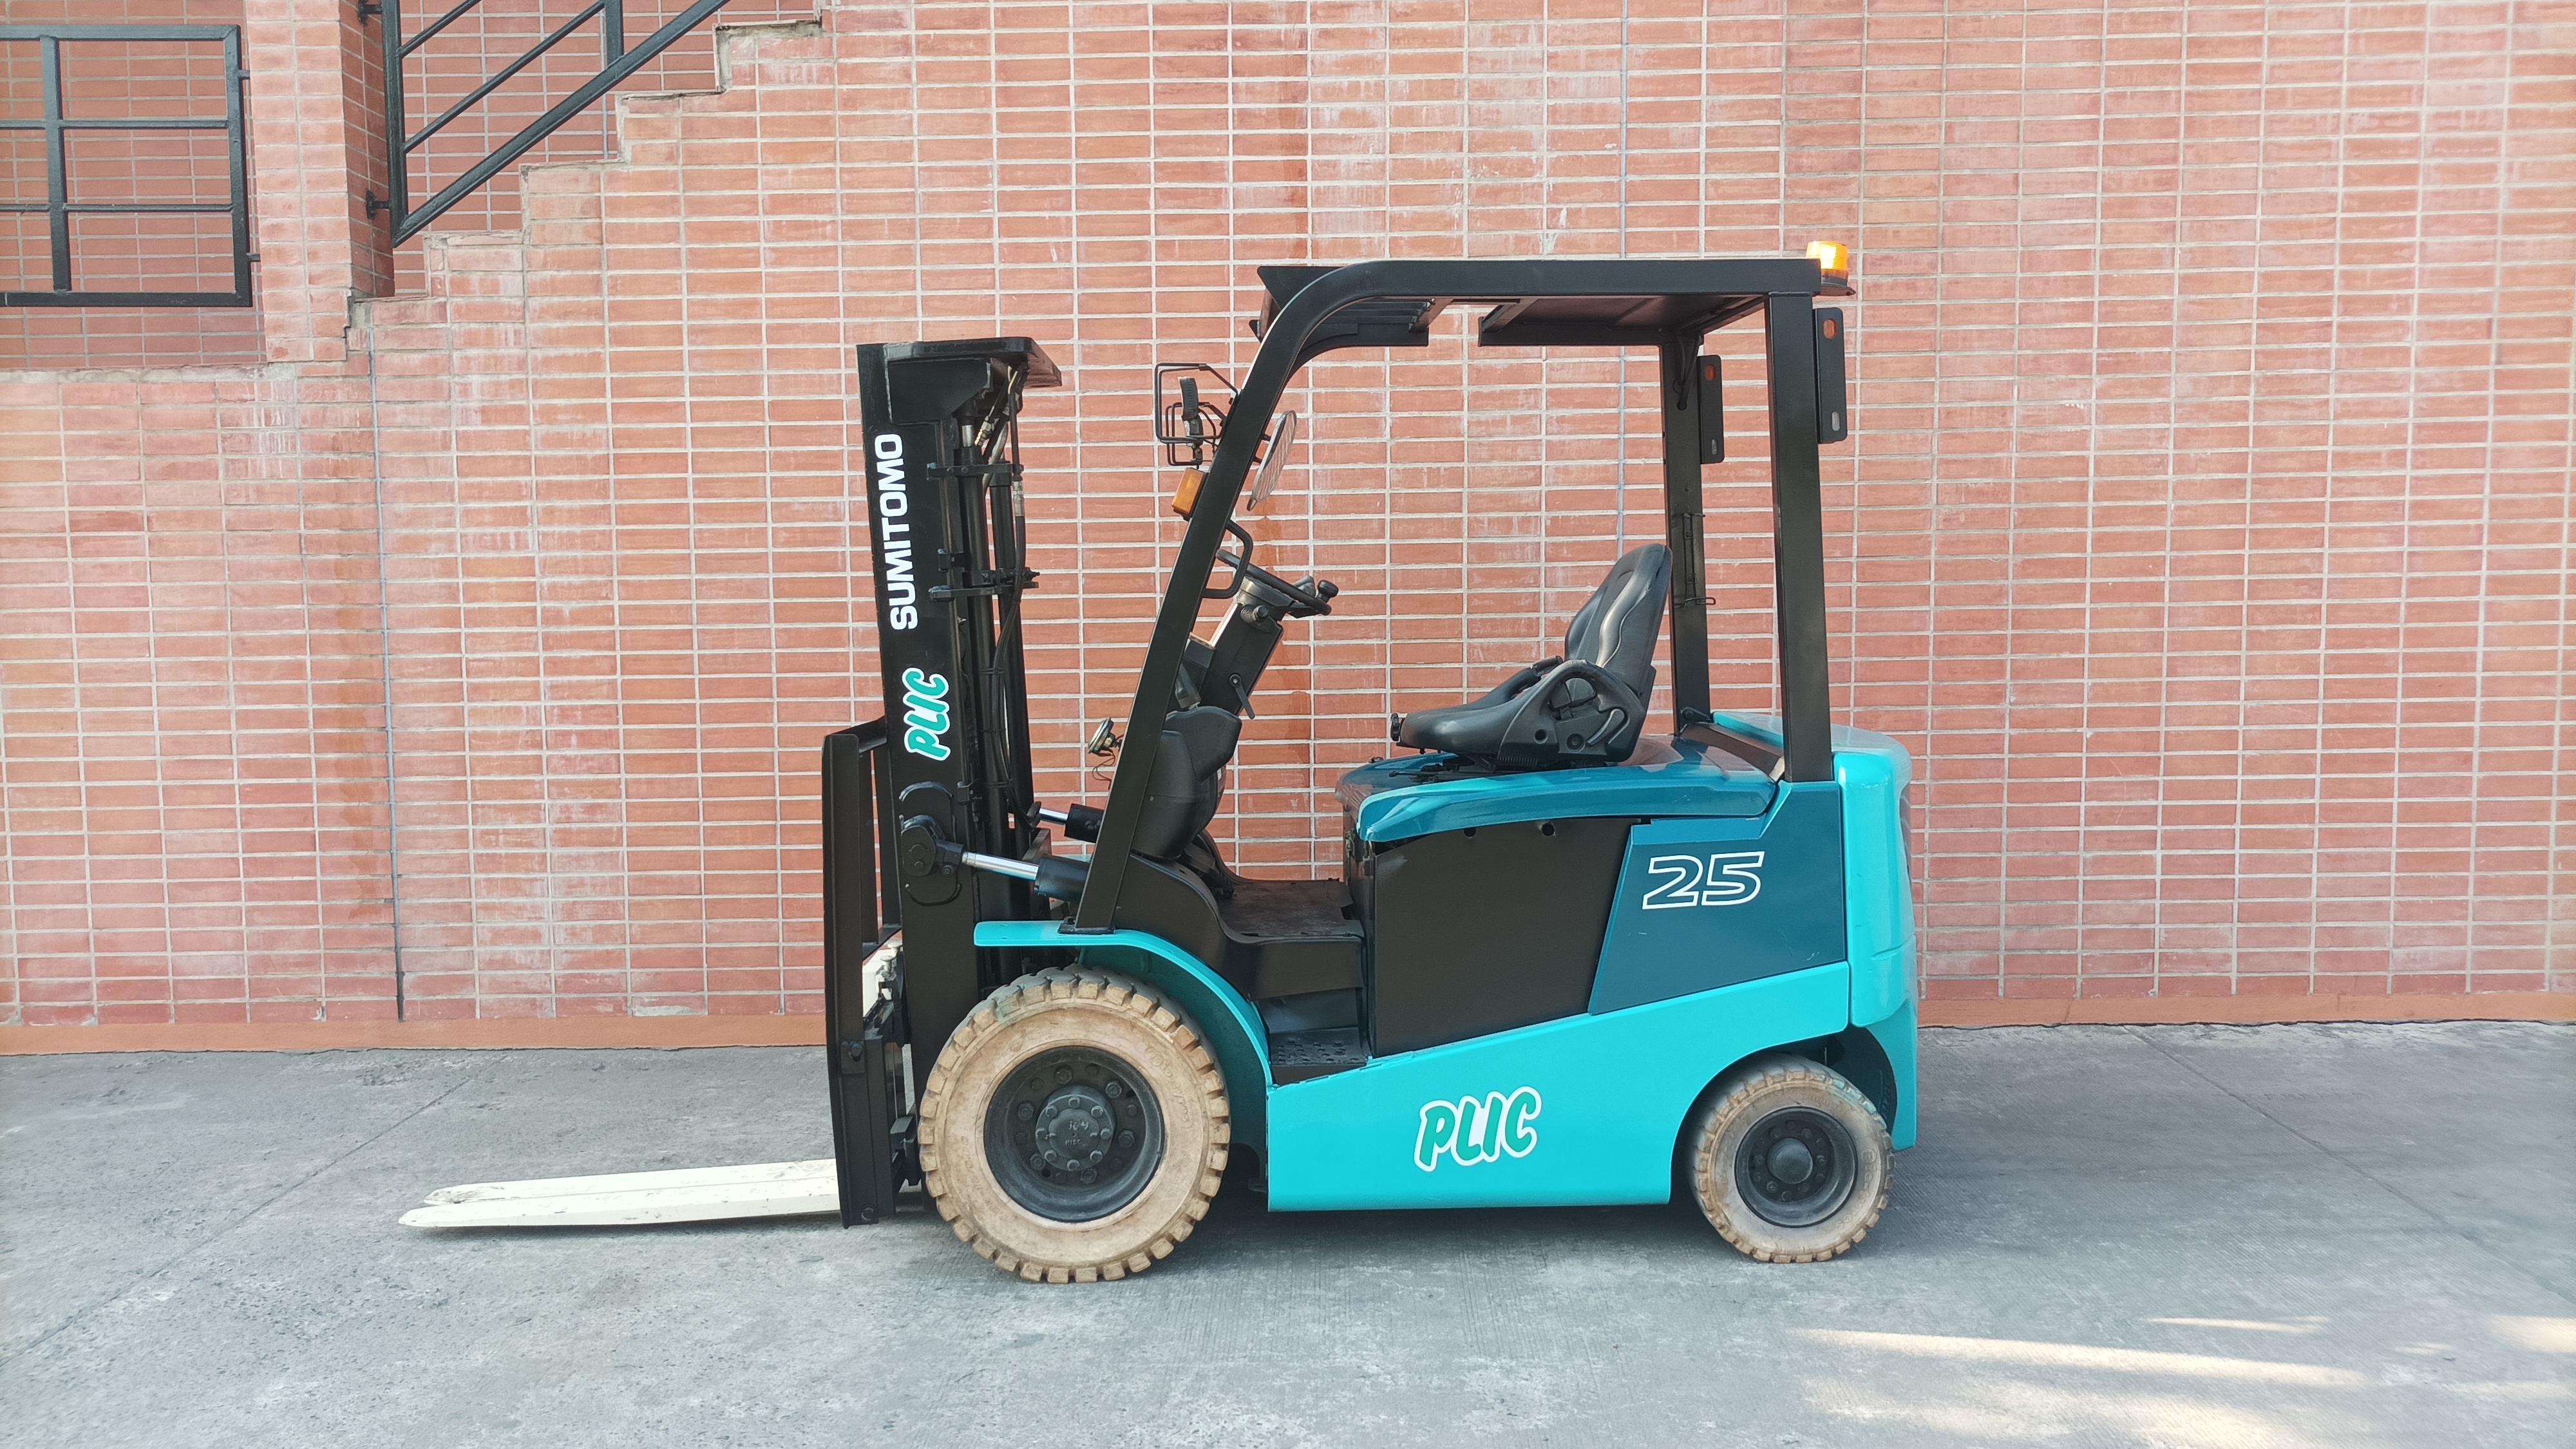 SUMITOMO FORKLIFT COUNTER 8FB25PXIII-VF300, ELECTRIC, 2.5